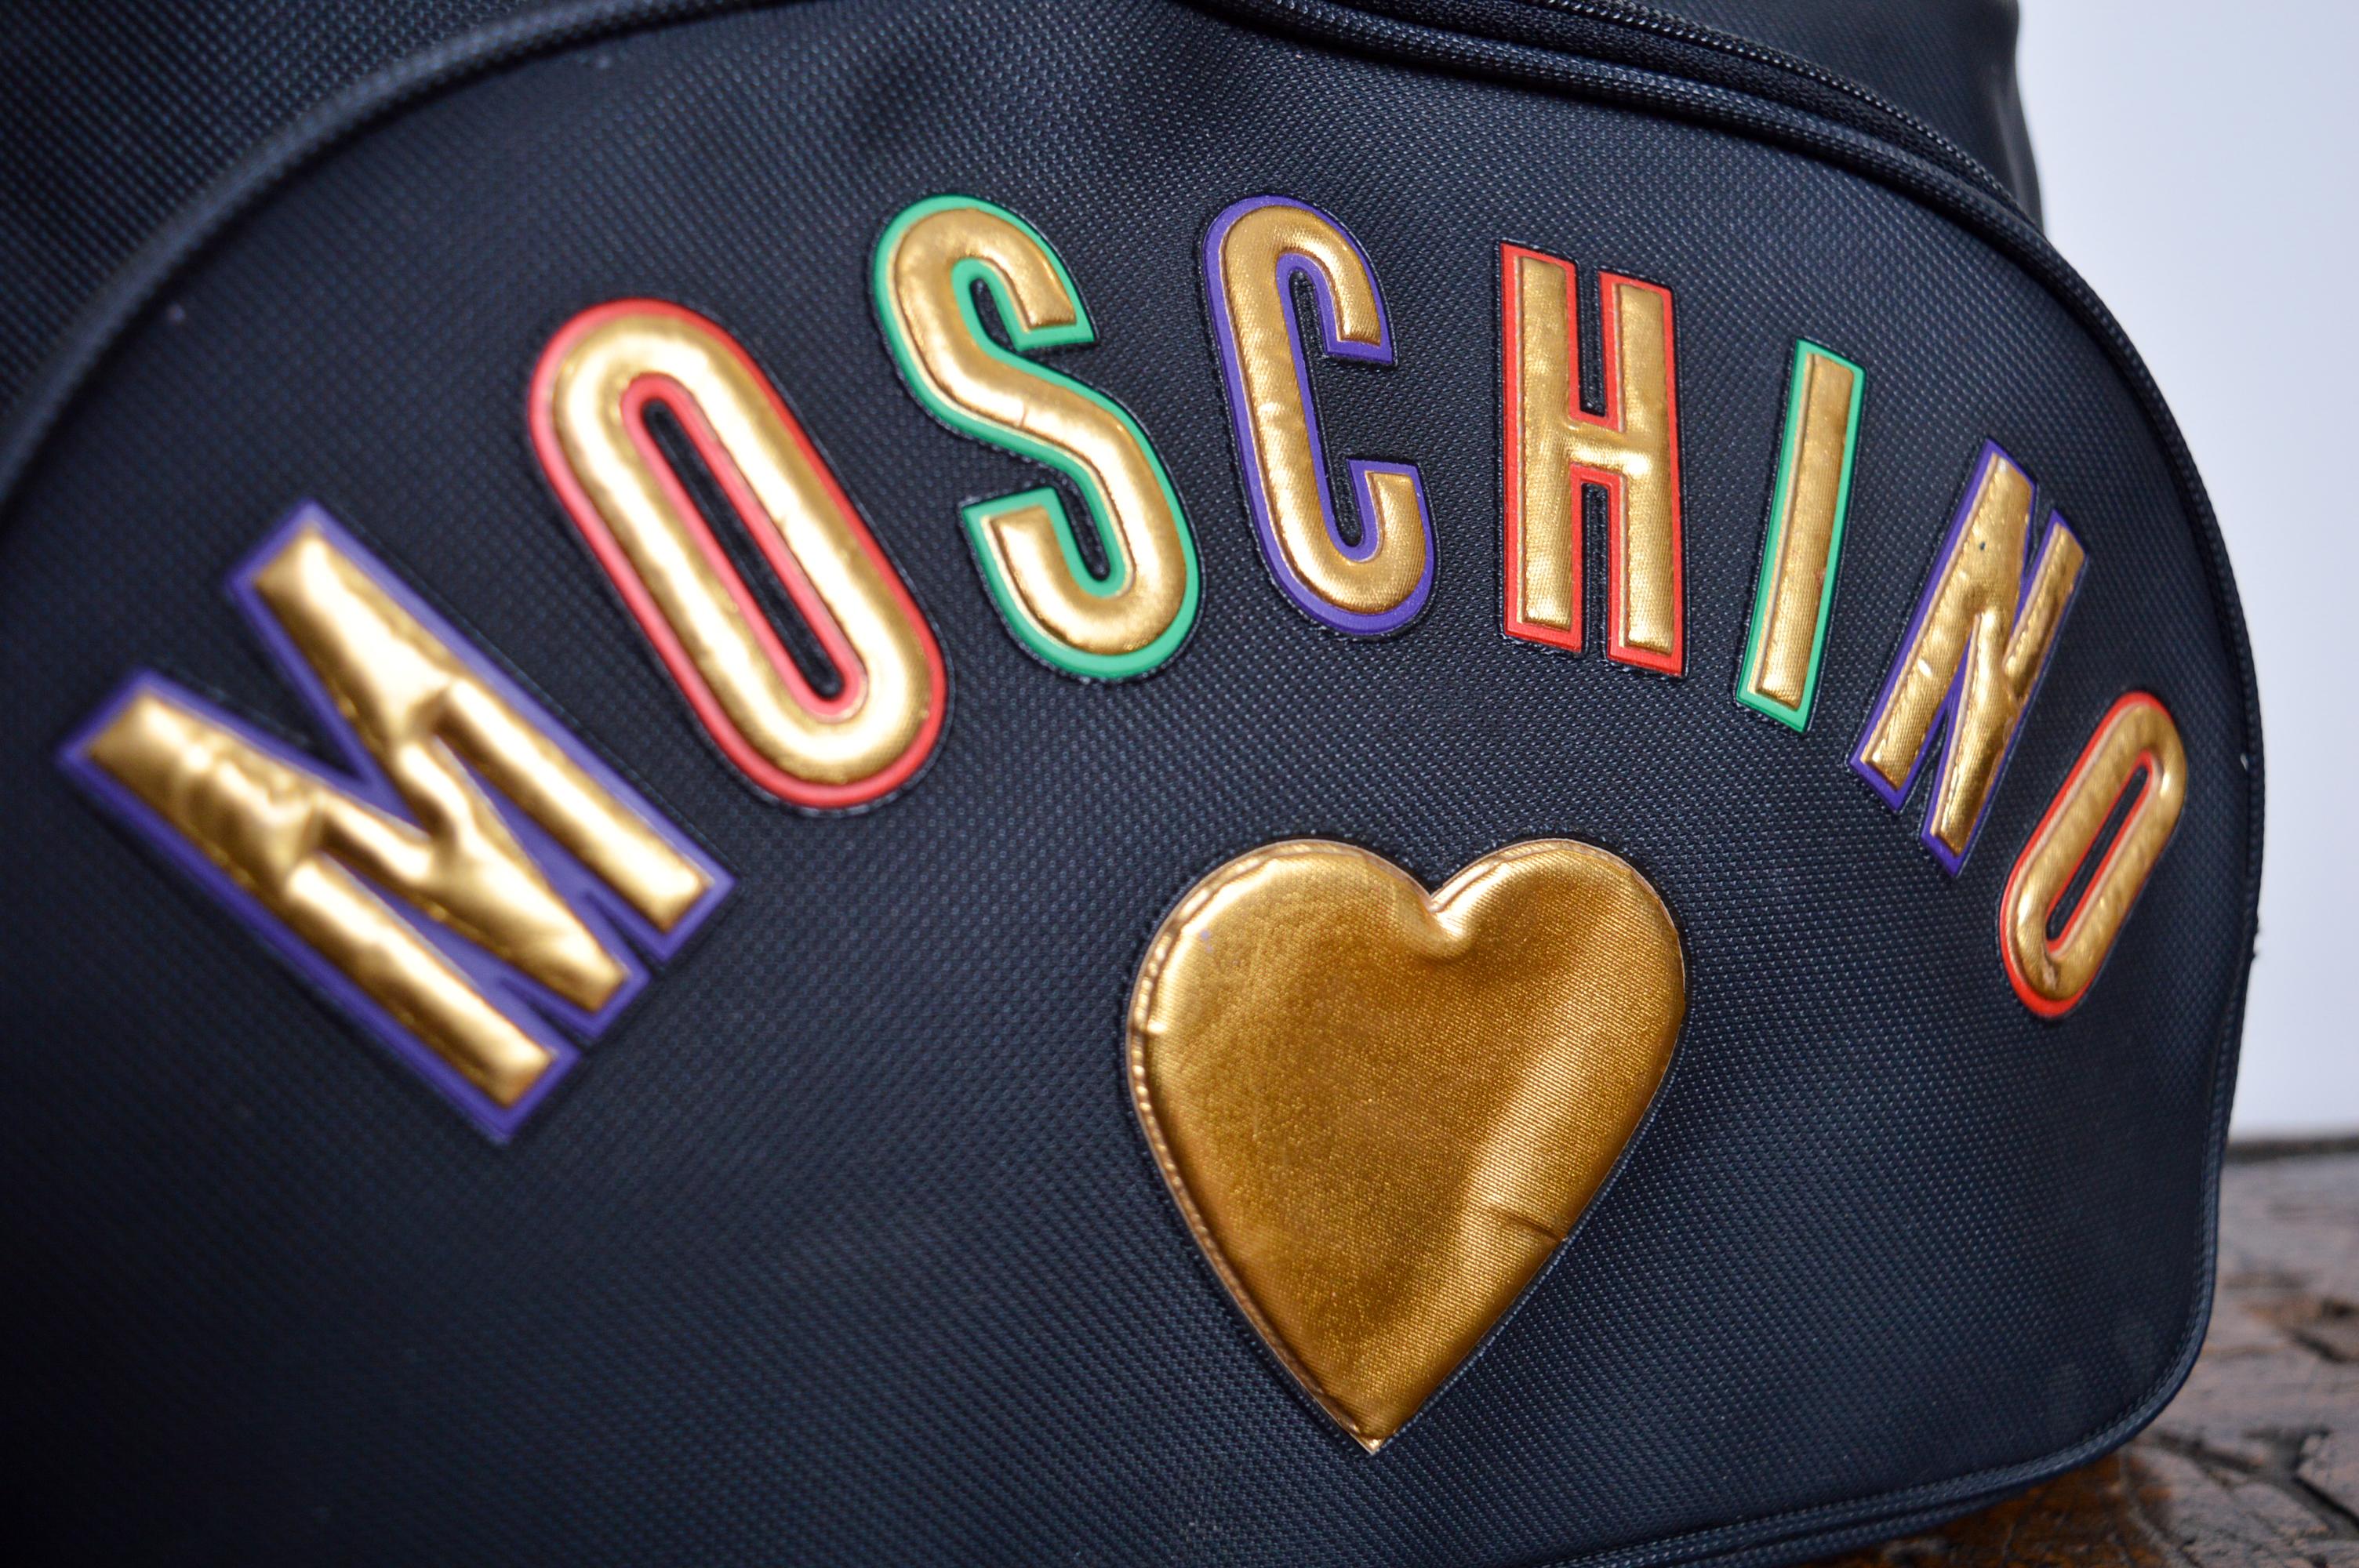 1990's Vintage Moschino Backpack - Gold Letter Rucksack Bag In Good Condition For Sale In Sheffield, GB